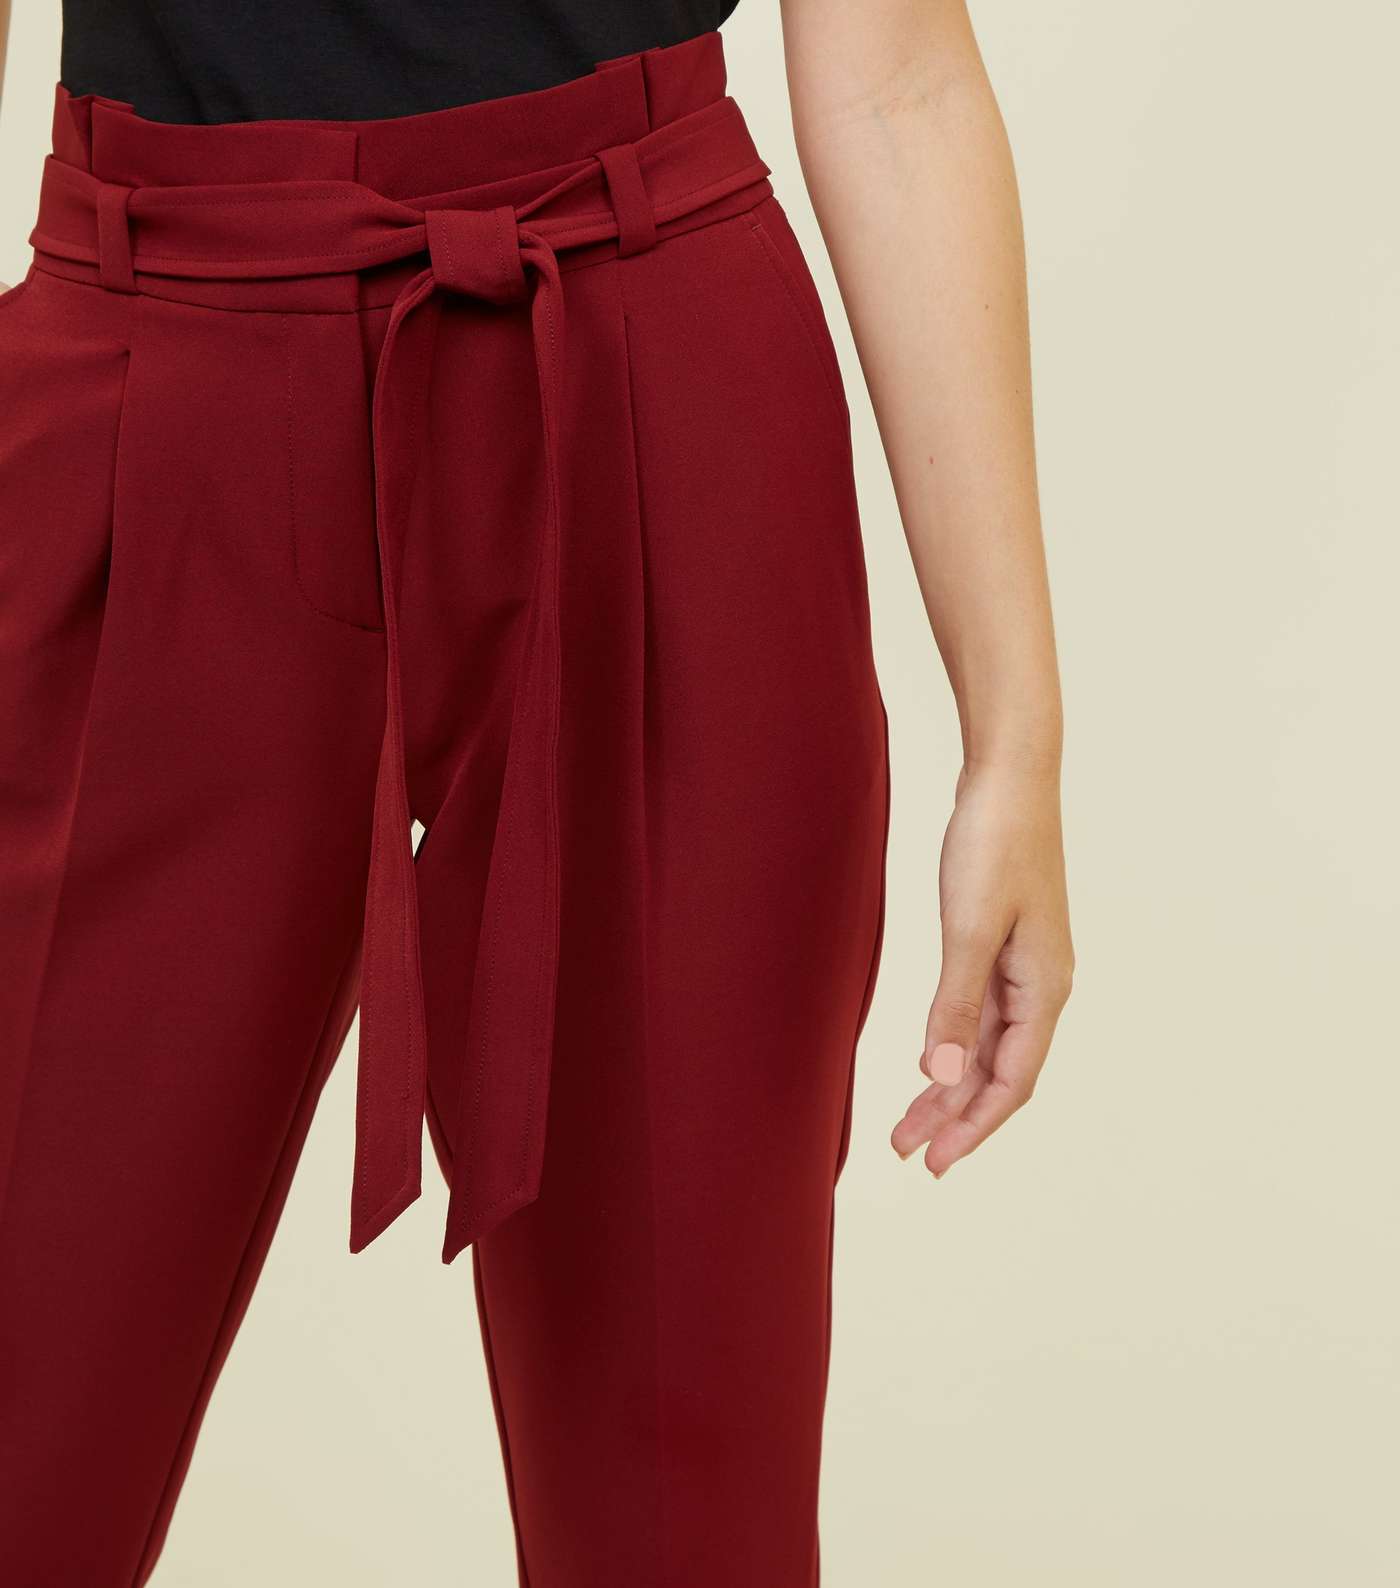 Petite Burgundy Belted Paperbag Waist Trousers Image 5